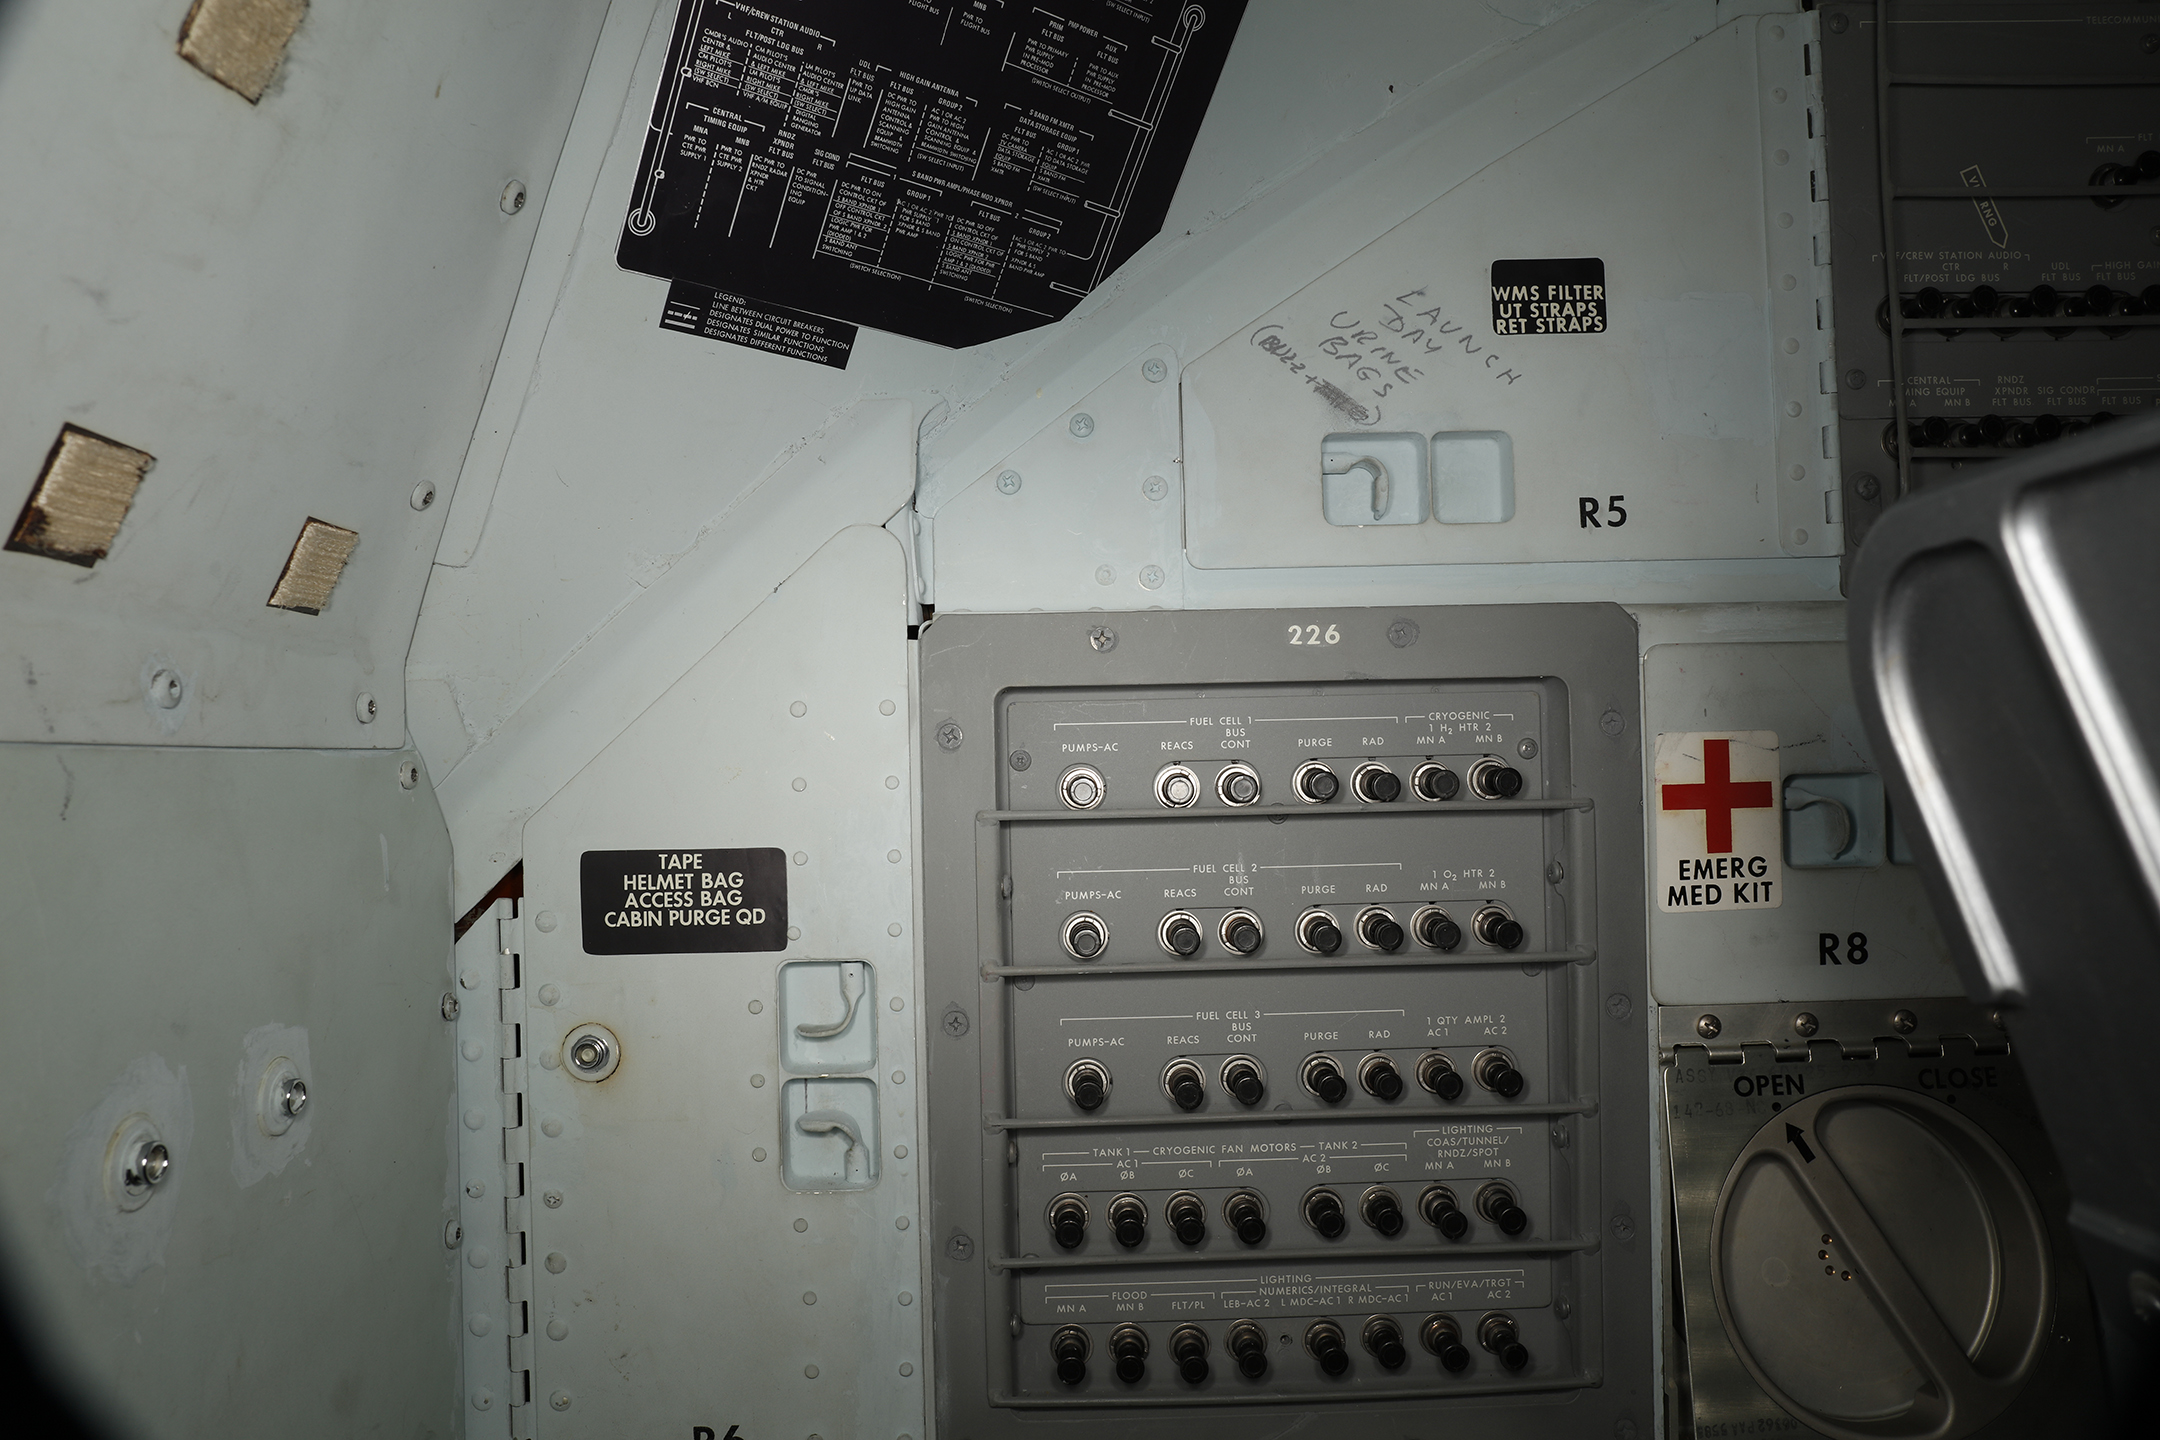 These notes illustrate improvisation during the mission and modification of pre-flight plans for what items were to be placed in each locker. The reasons suggest something about what life was like on the way to the moon and back. Photo: Smithsonian Institution .